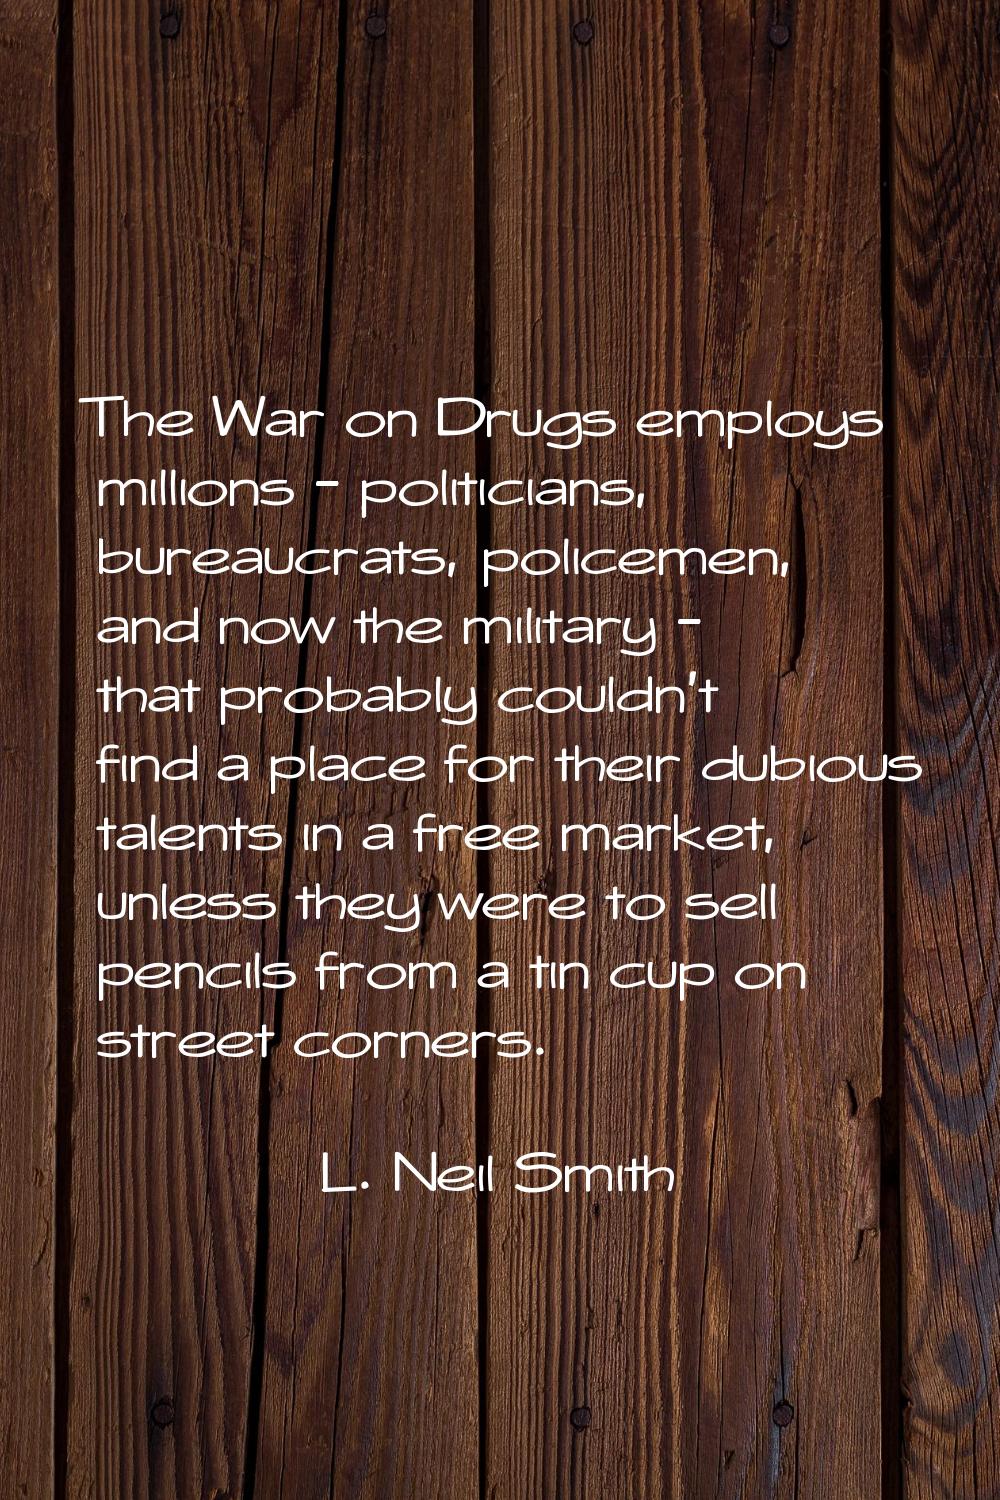 The War on Drugs employs millions - politicians, bureaucrats, policemen, and now the military - tha